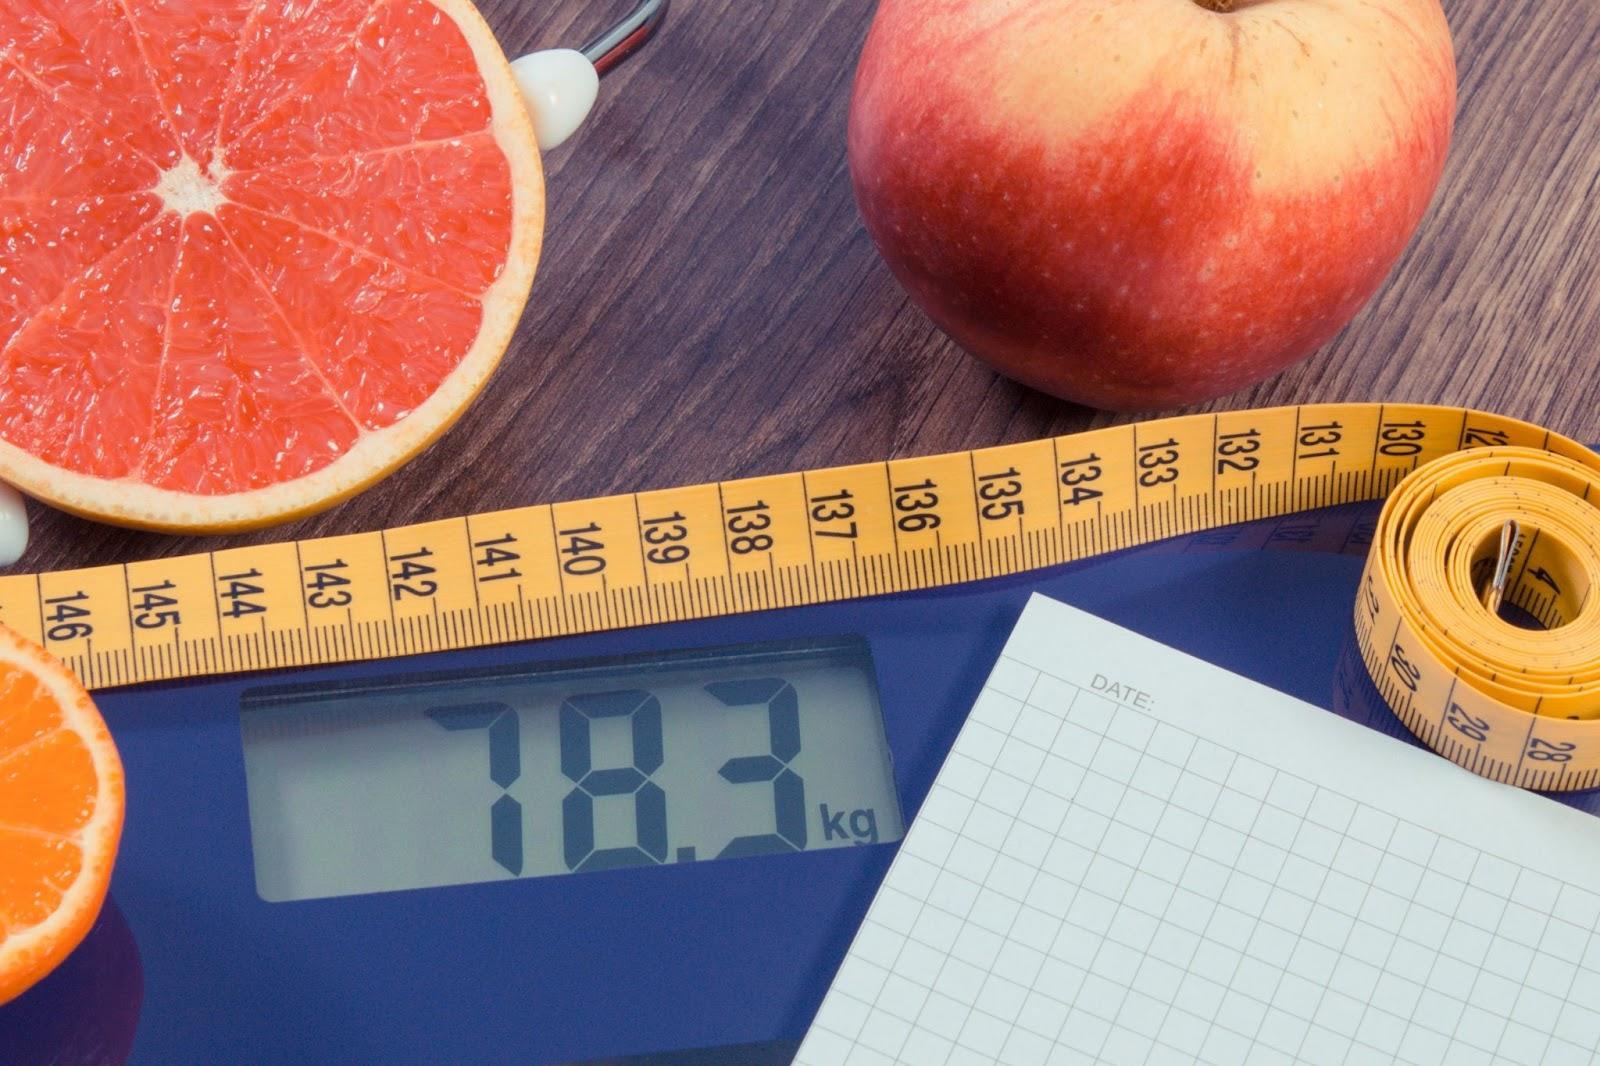 Tips for Using Digital Weighing Scales